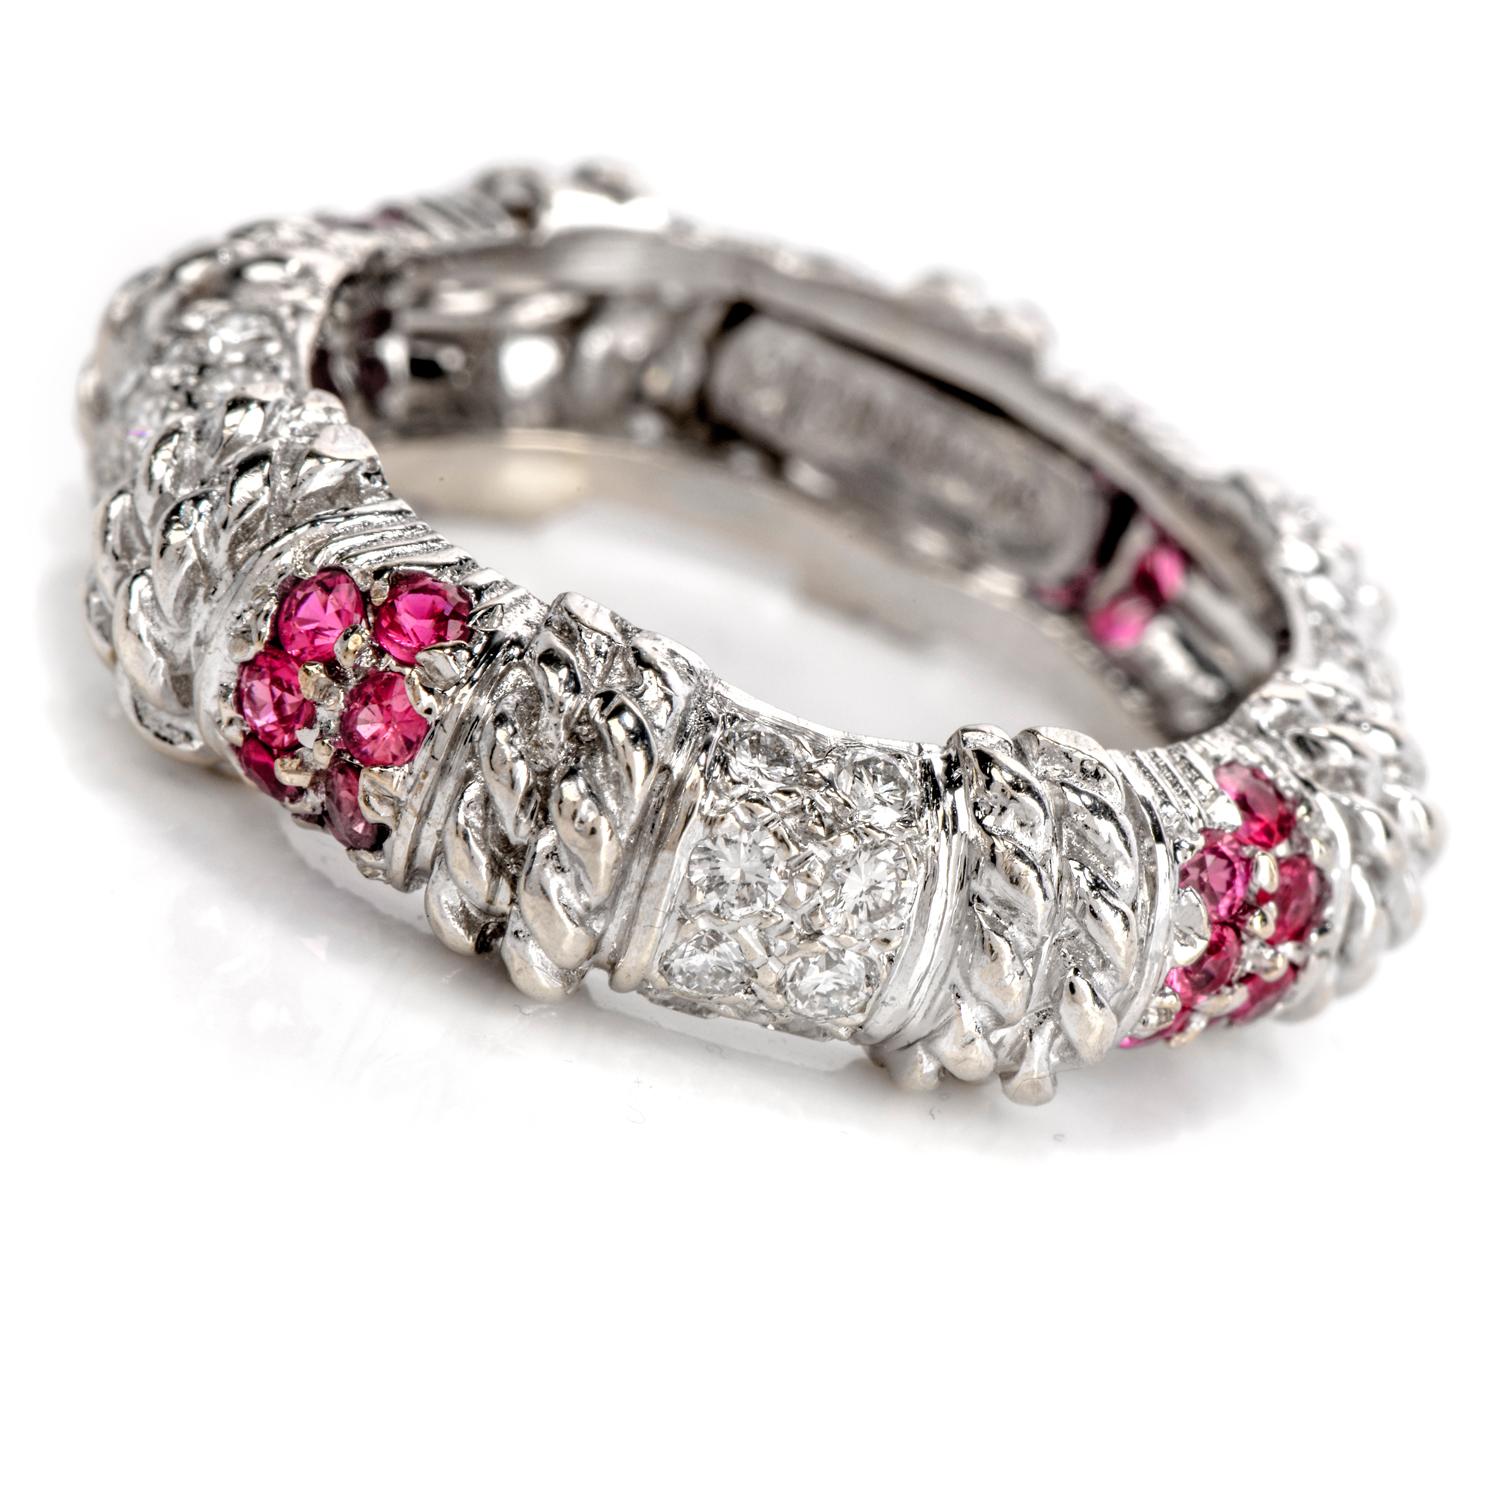 This alluring designer Cassis stack band ring crafted in 18K white gold is embellished with alternating sections of round cut white sparkling diamonds, lovely pink sapphires, and a rope style motif. This ring has a gram weight of approximately 6.91